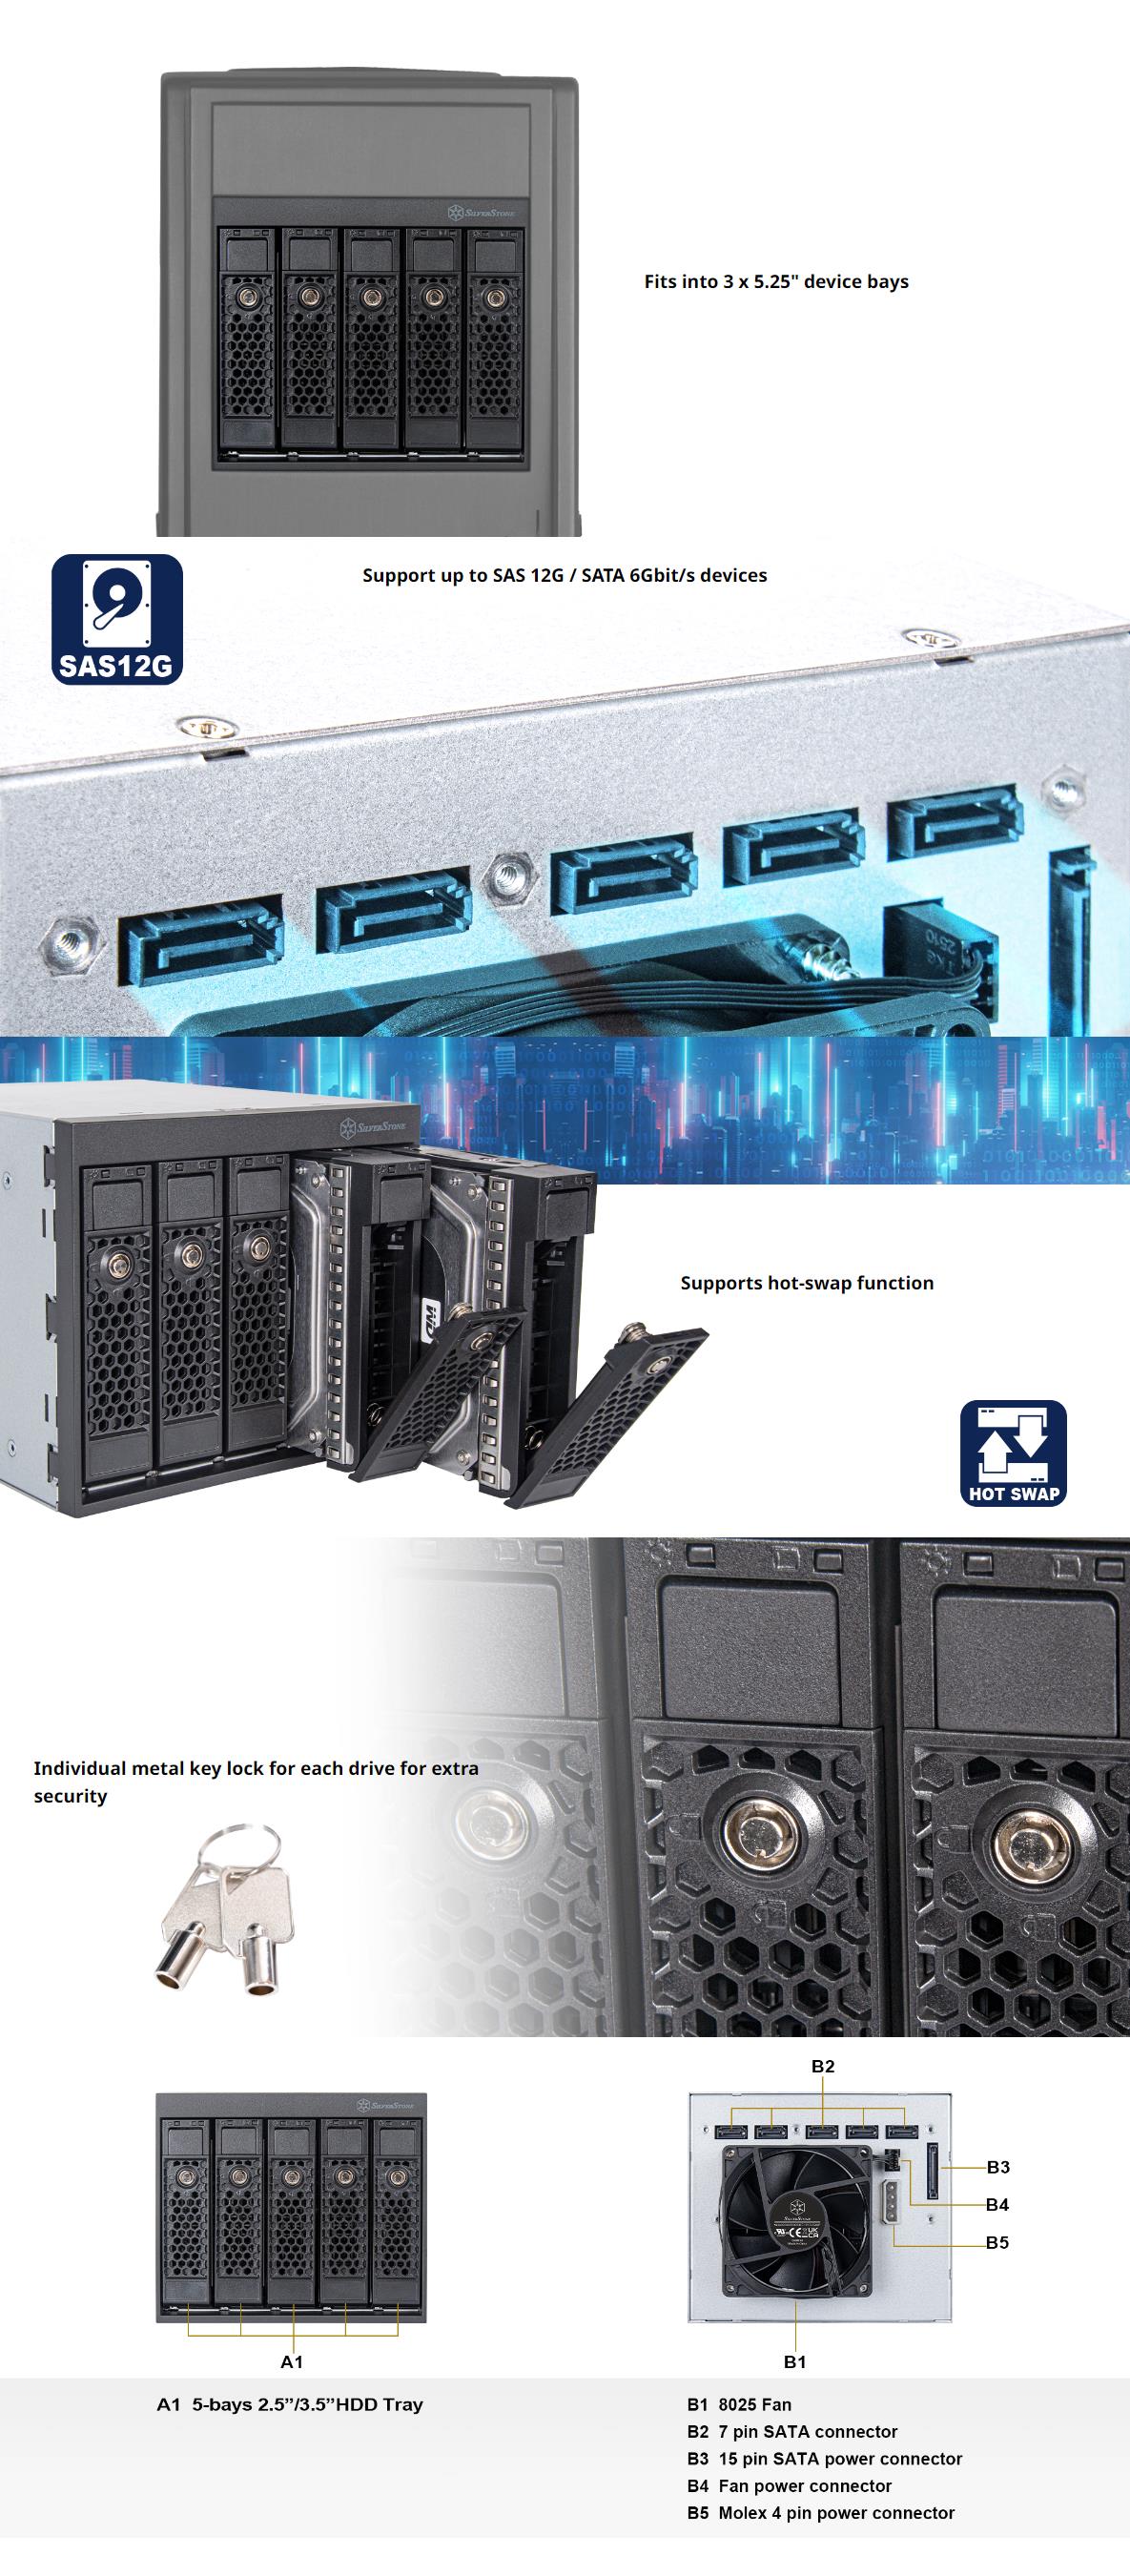 A large marketing image providing additional information about the product SilverStone FS305-E 3x 5.25" to 5x 3.5" Hot Swap Adapter Cage - Additional alt info not provided